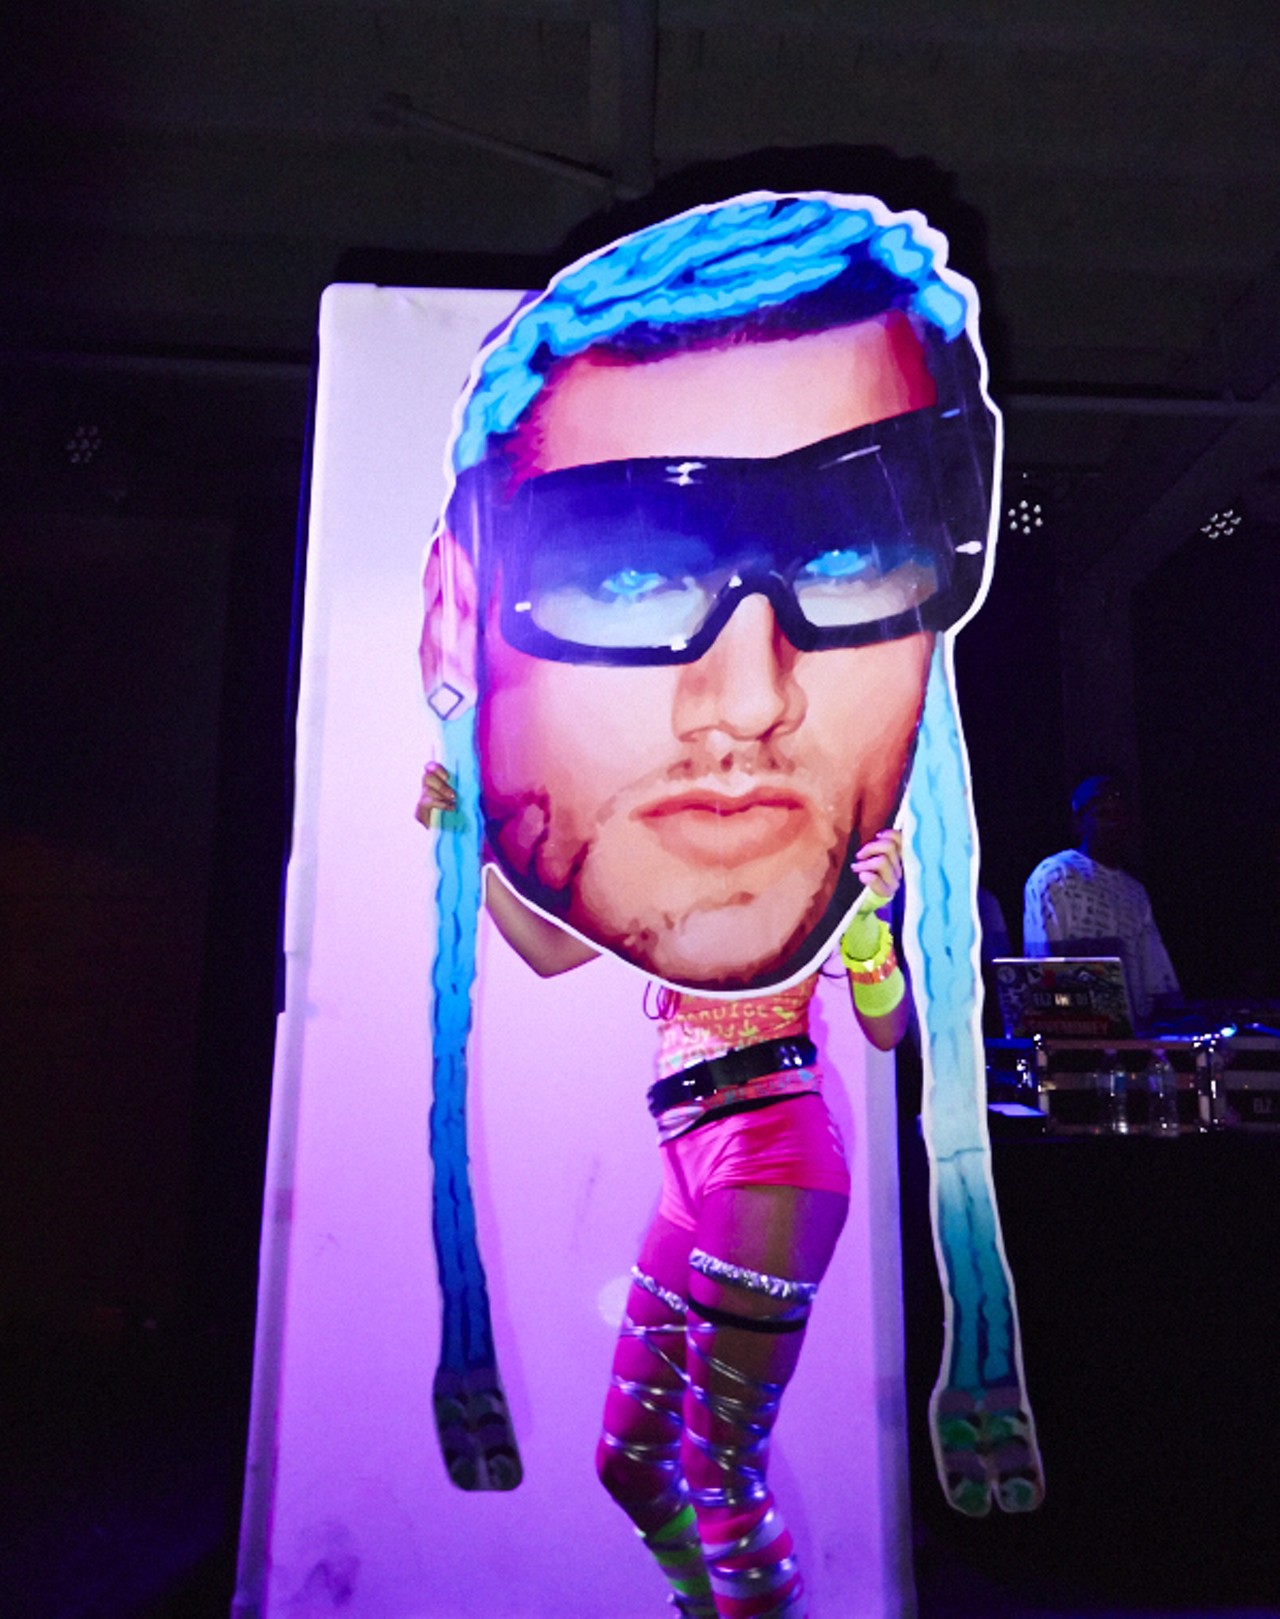 Riff Raff at the Ready Room